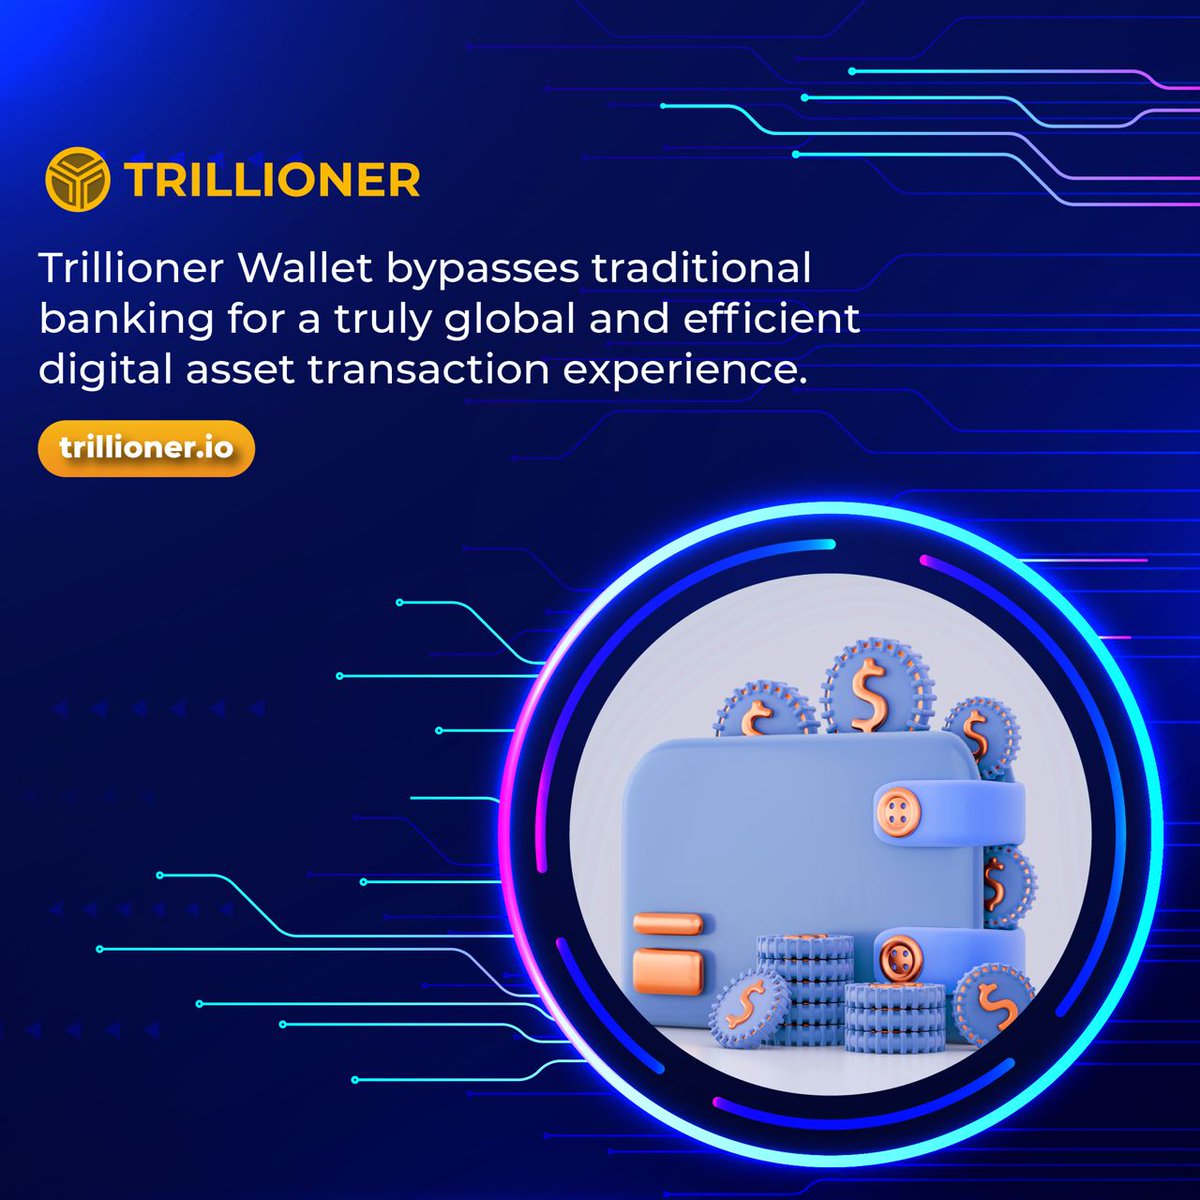 Trillioner Wallet bypasses traditional banking for a truly global and efficient digital asset transaction experience. 

#TLC #Trillioner #cryptocurrency #cryptonews #cryptotrading #Blockchain #metaverse #blockchainnews #BlockchainInnovation